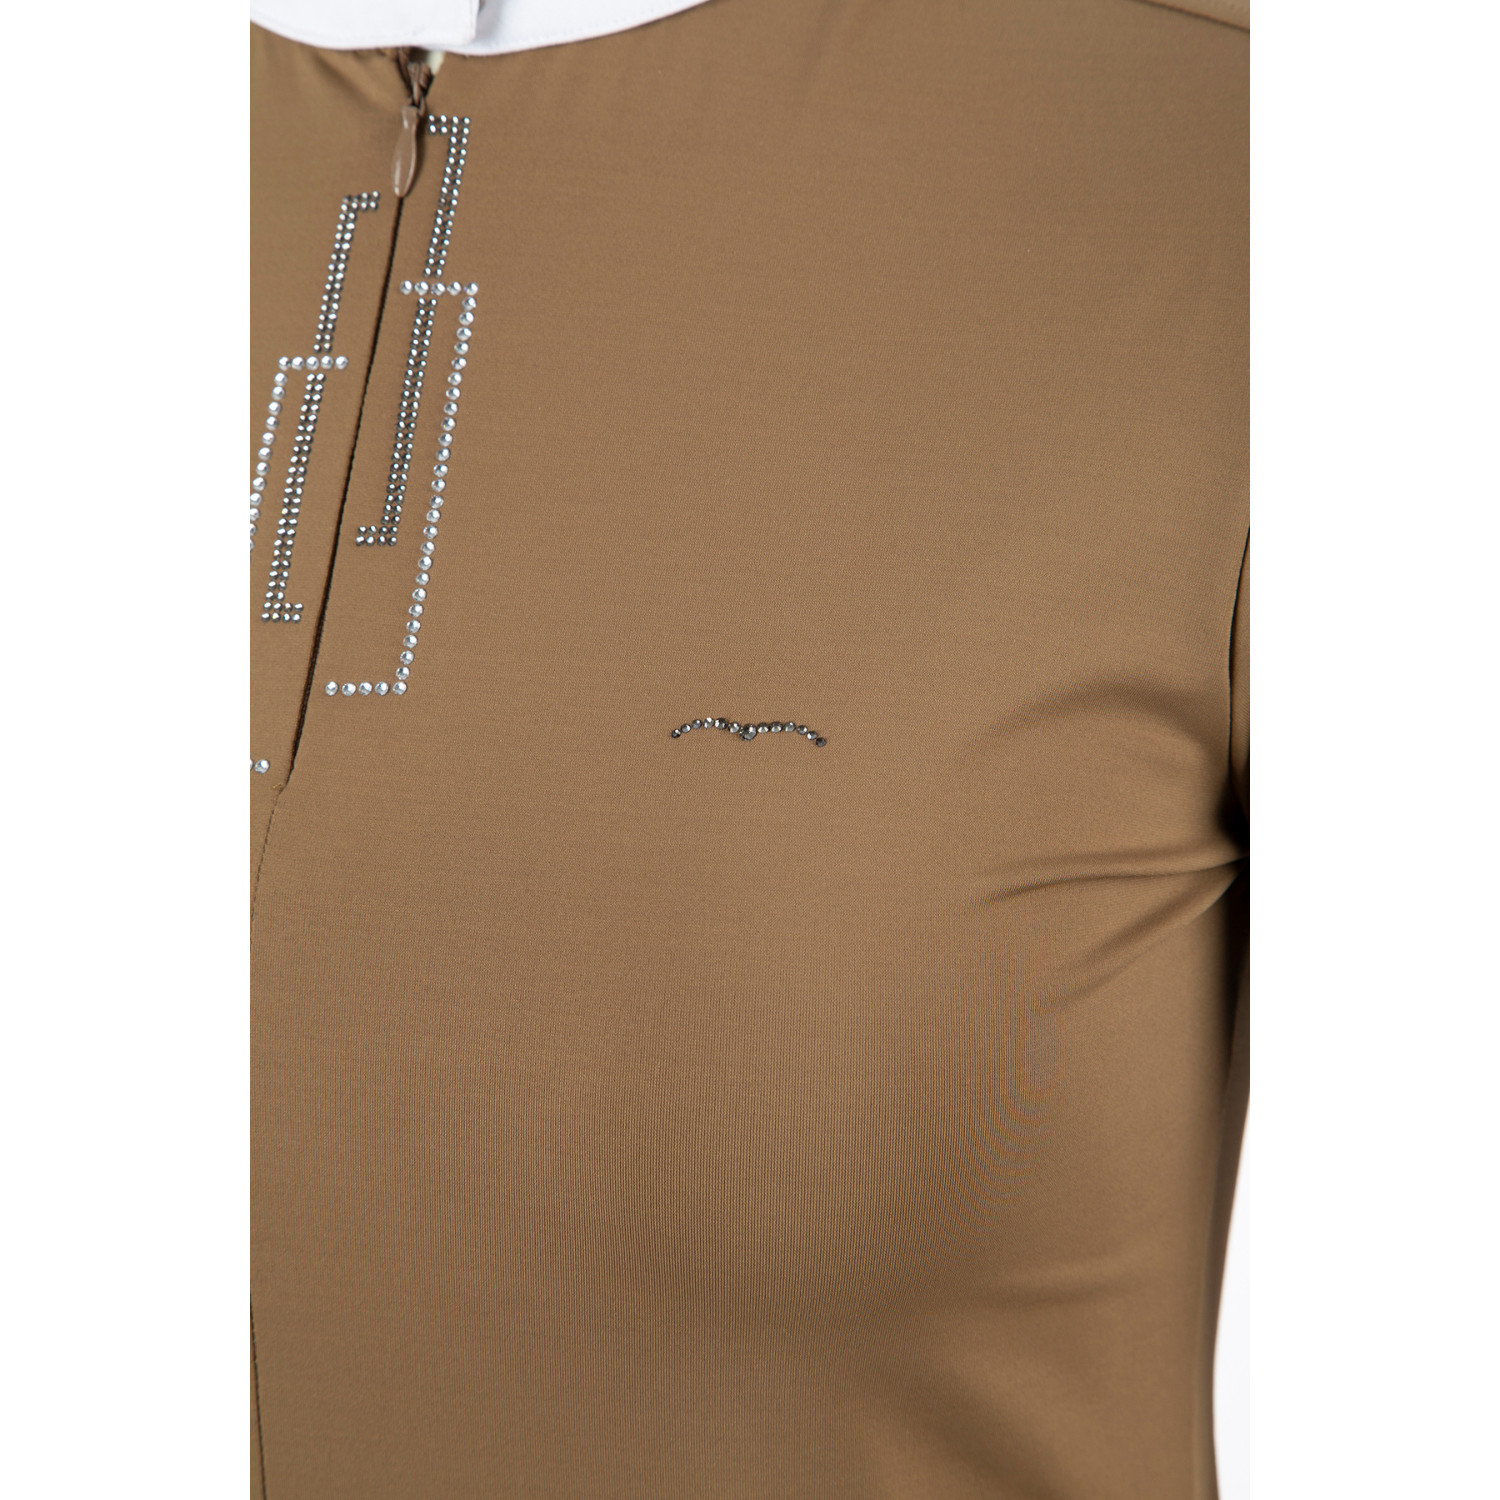 Ladies Buby Competition Show Shirt - Sand